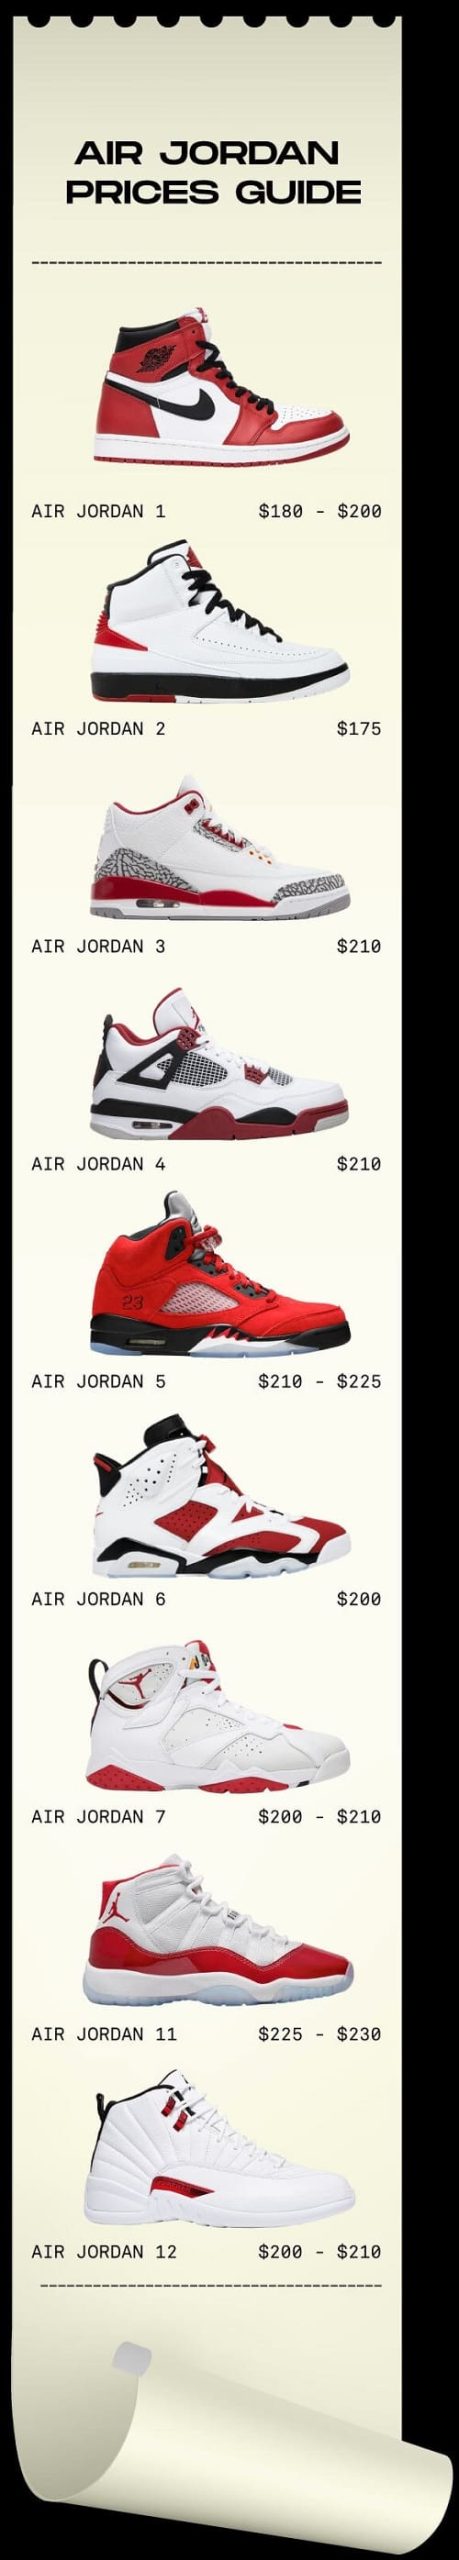 Air Jordan Prices Guide - How Much Do Jordans Retail for?